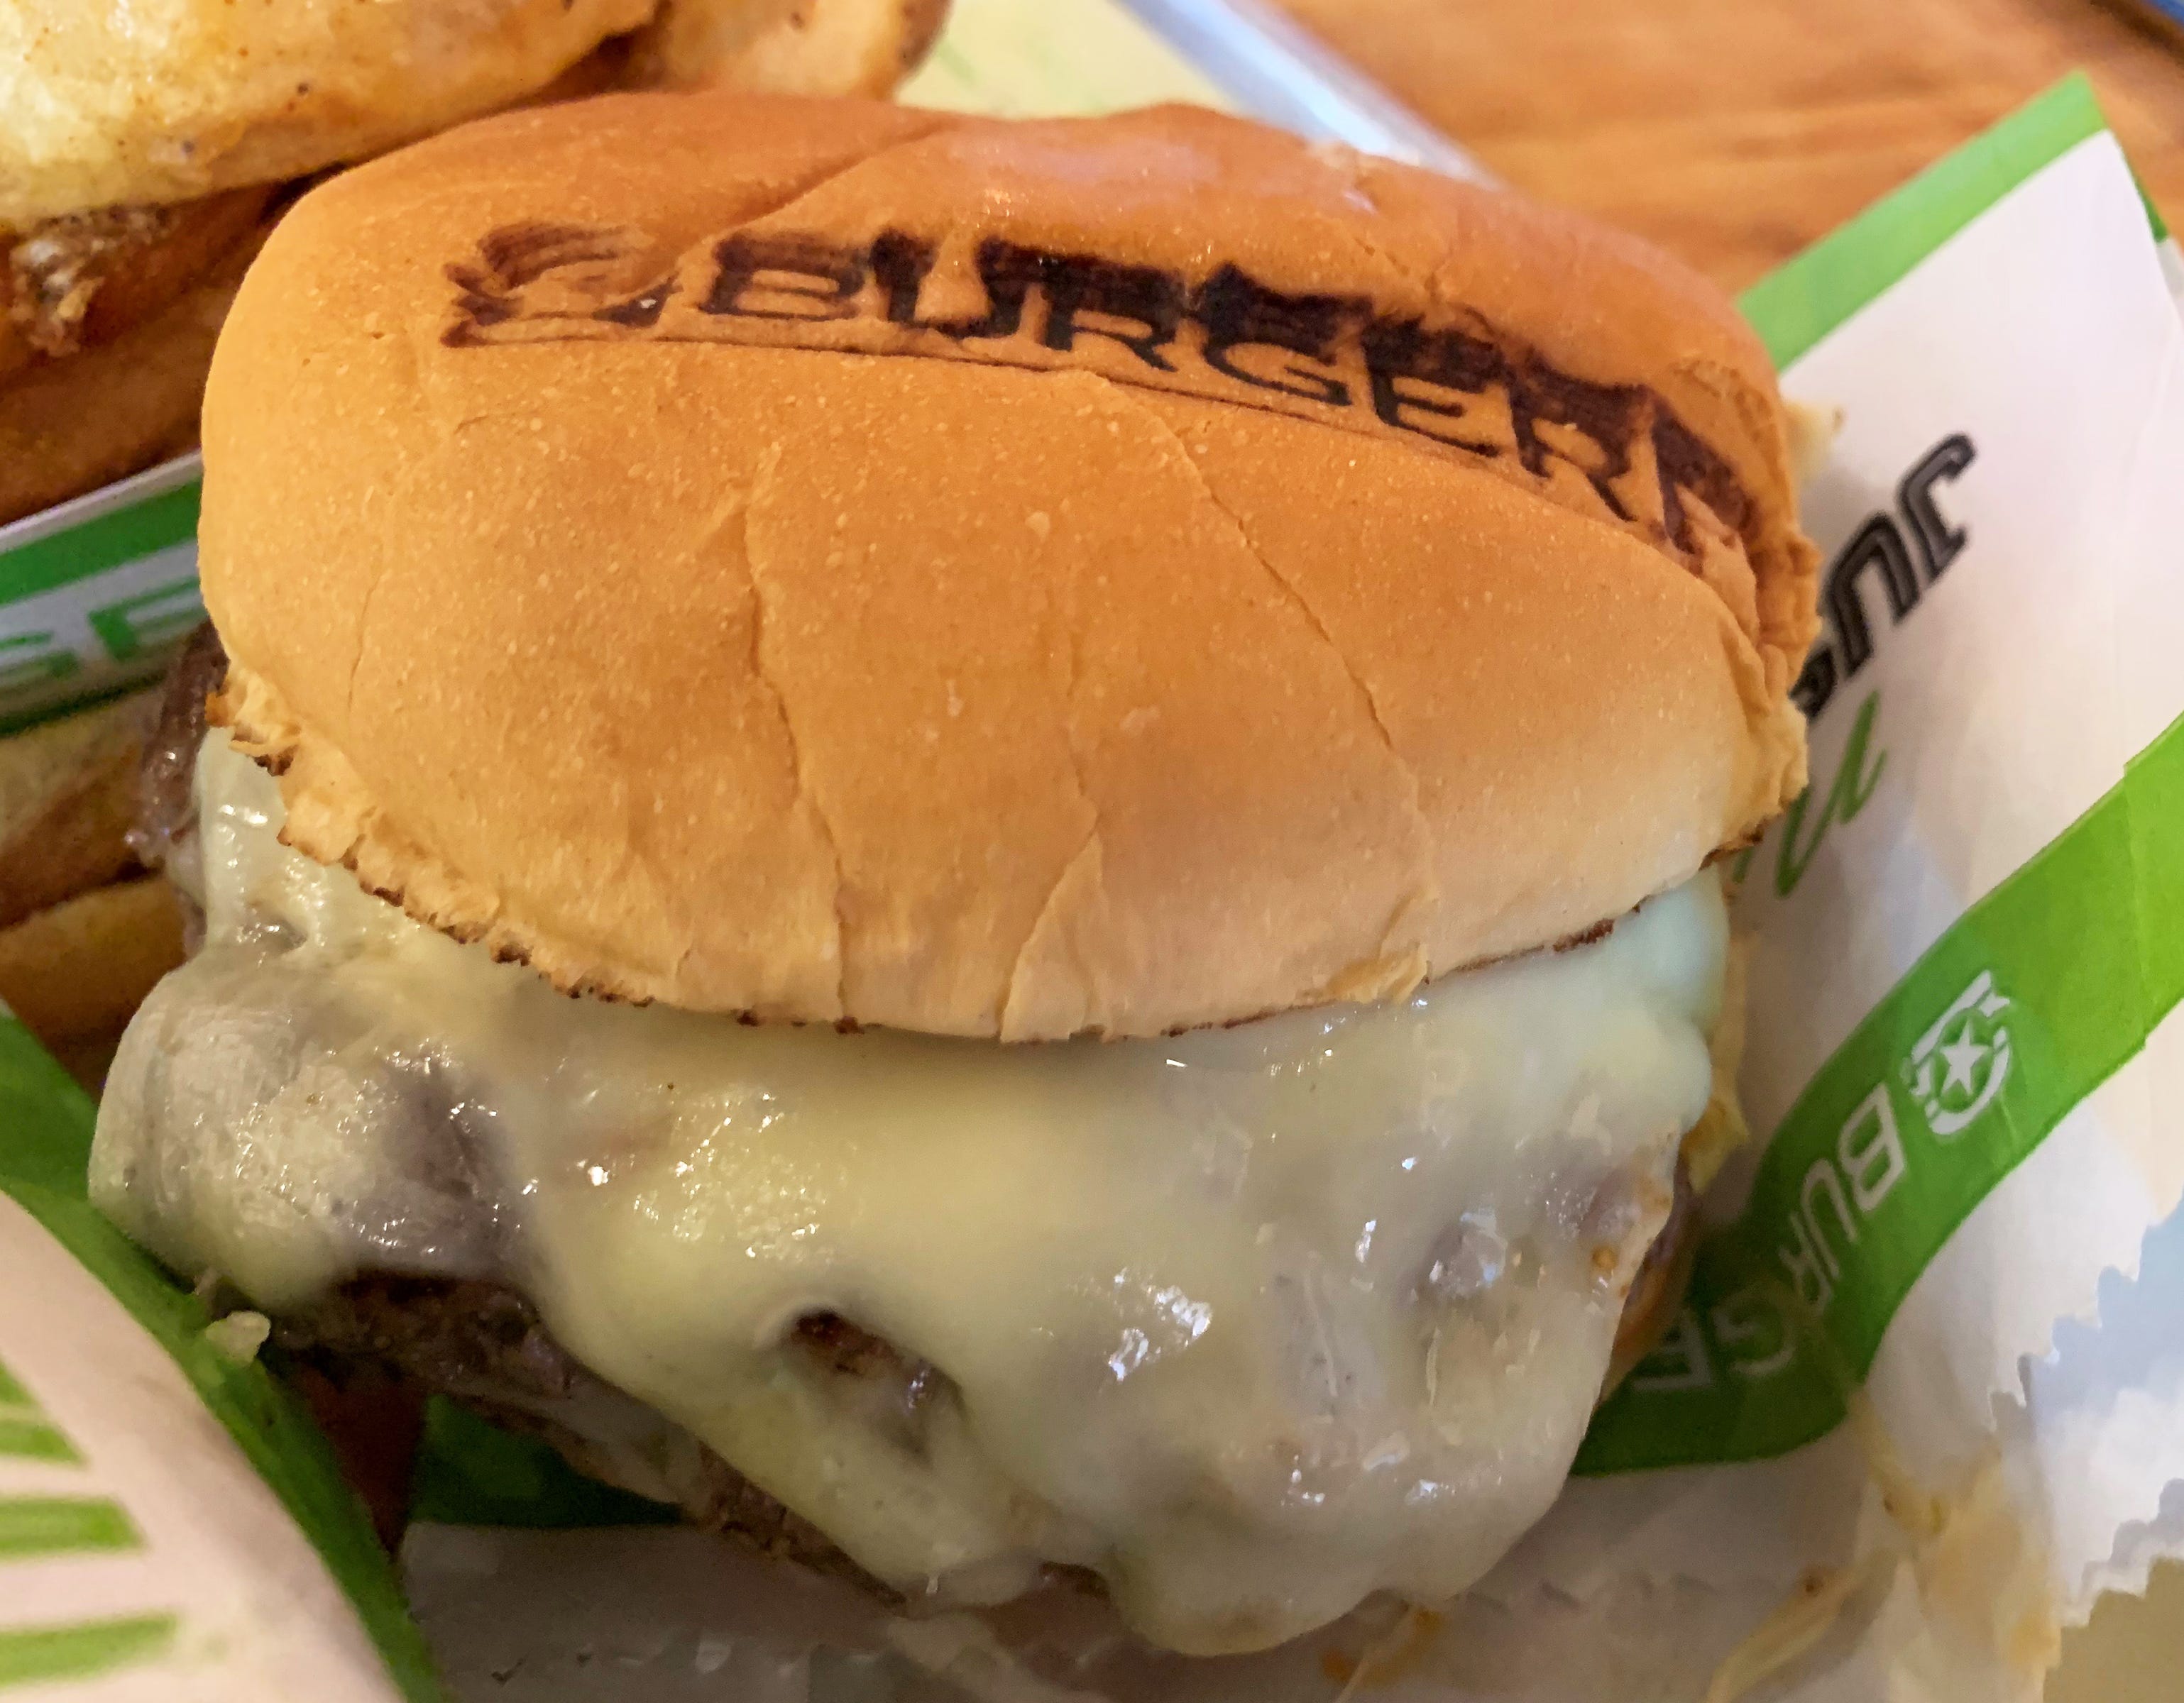 “The CEO,” a double Wagyu and brisket blend burger from BurgerFi.